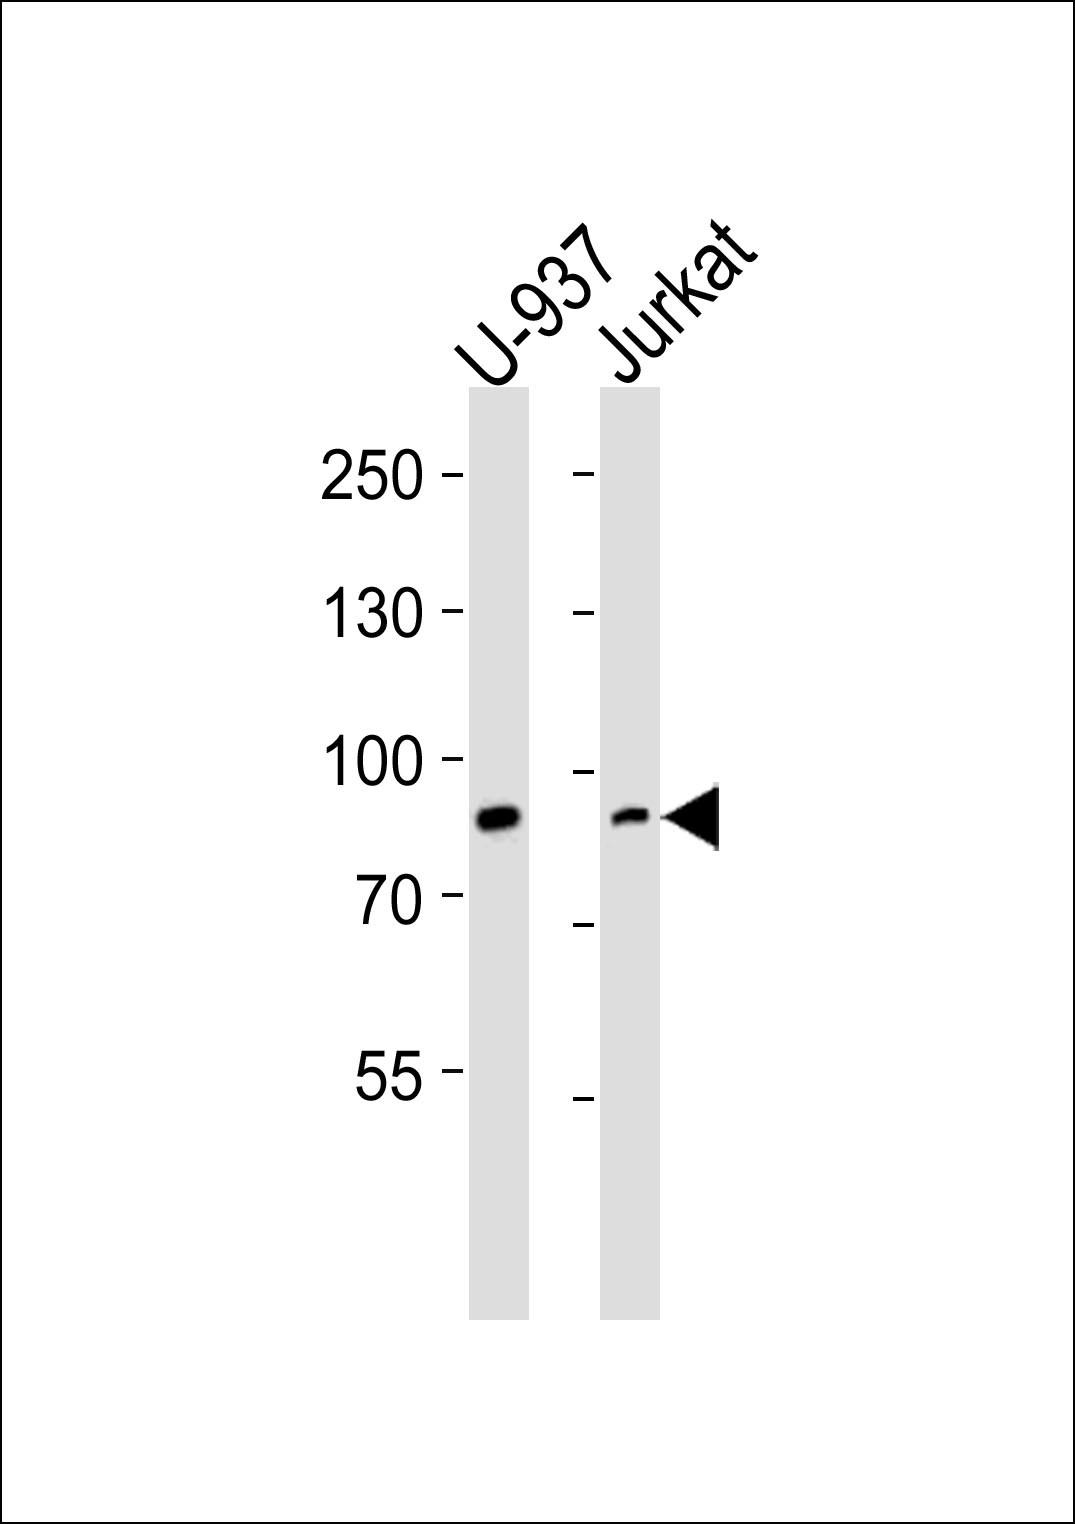 Western blot analysis of lysates from U-937, Jurkat cell line (from left to right), using PIK3R1/2 Antibody (Center)(Cat.  #AP20767c).  AP20767c was diluted at 1:1000 at each lane.  A goat anti-rabbit IgG H&L(HRP) at 1:5000 dilution was used as the secondary antibody. Lysates at 35ug per lane.